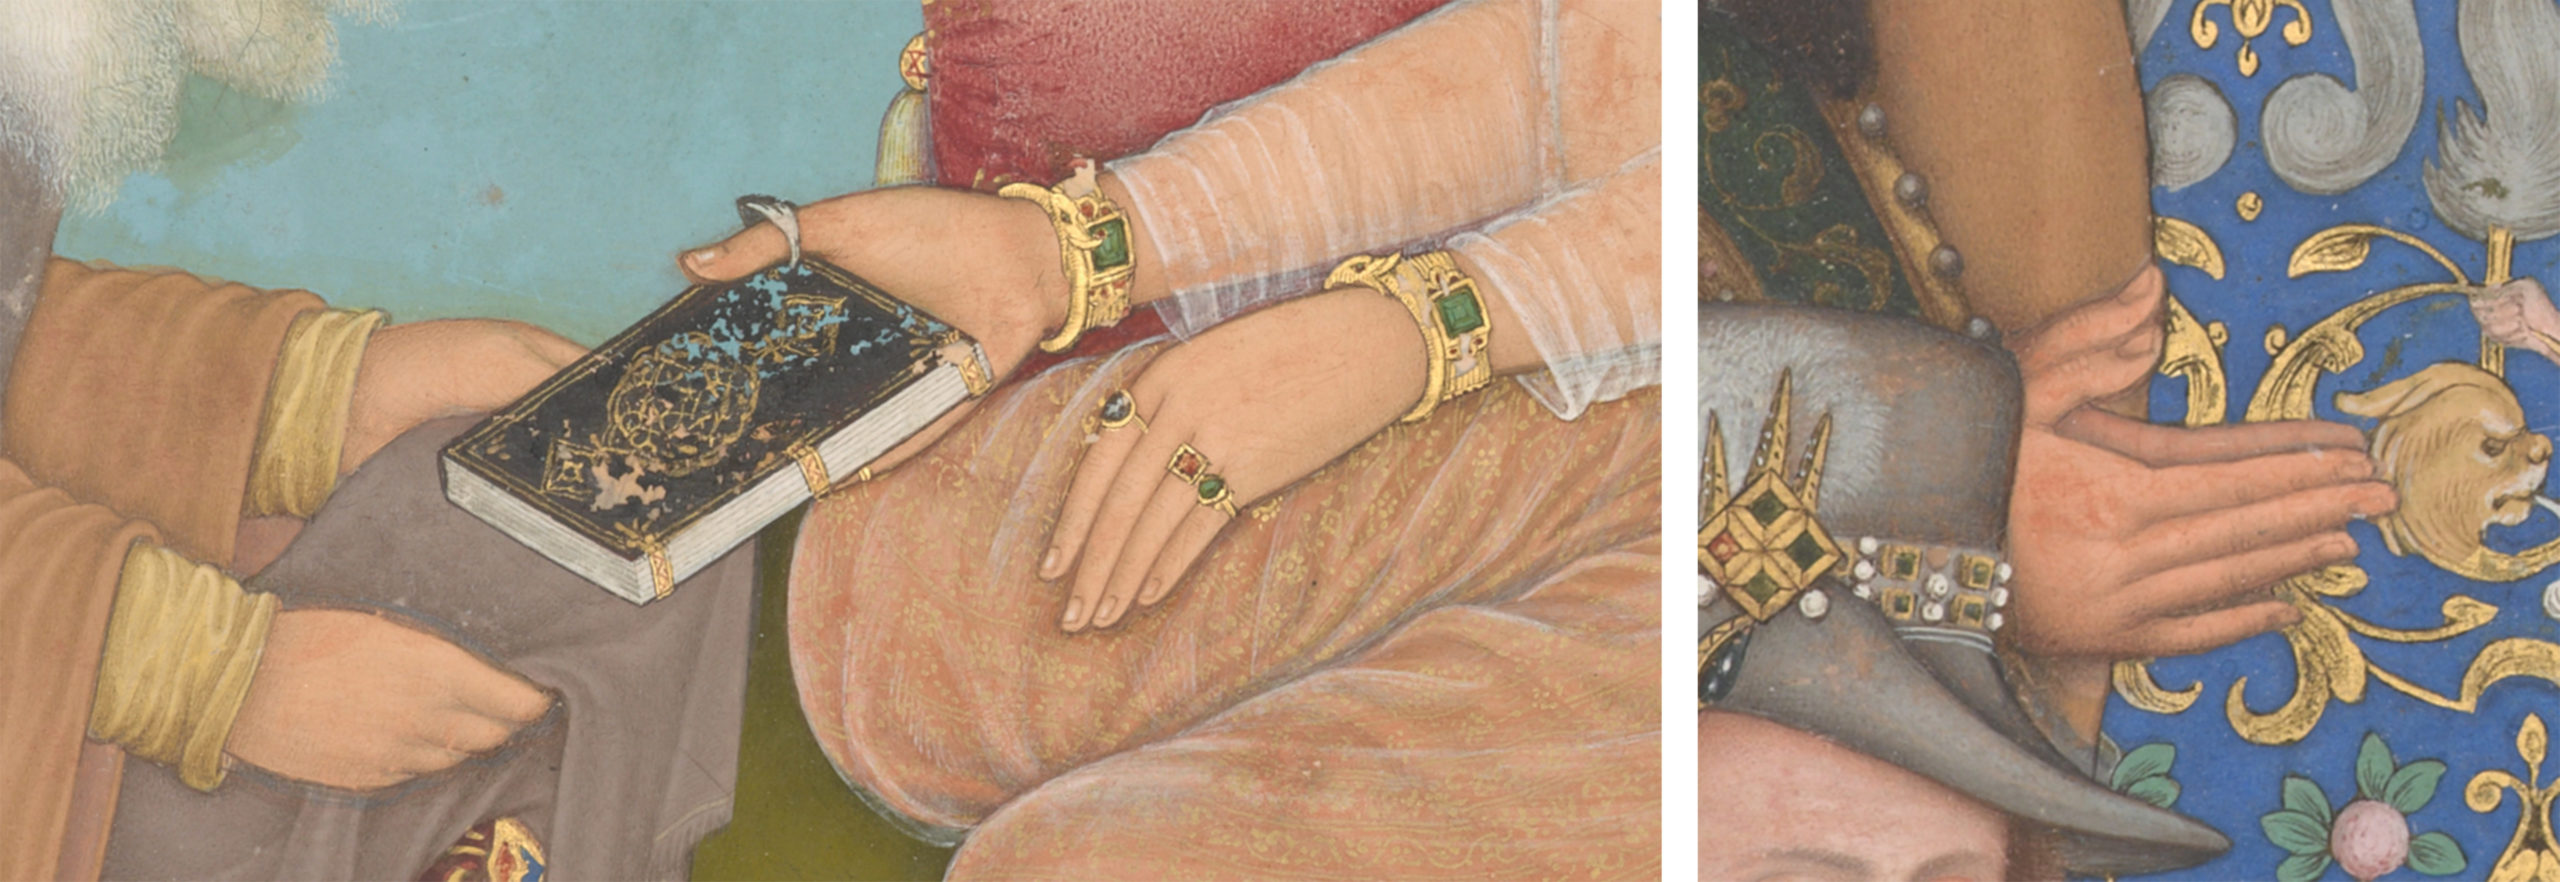 Left: Shaikh's bare hands and the bejeweled hands of Jahangir (detail); right: Ottoman sultan’s clasped hands (detail), Bichitr, margins by Muhammad Sadiq, Jahangir Preferring a Sufi Shaikh to Kings from the "St. Petersburg Album," 1615–18, opaque watercolor, gold and ink on paper, 46.9 × 30.7 cm (Freer|Sackler: The Smithsonian's Museums of Asian Art, Washington DC)